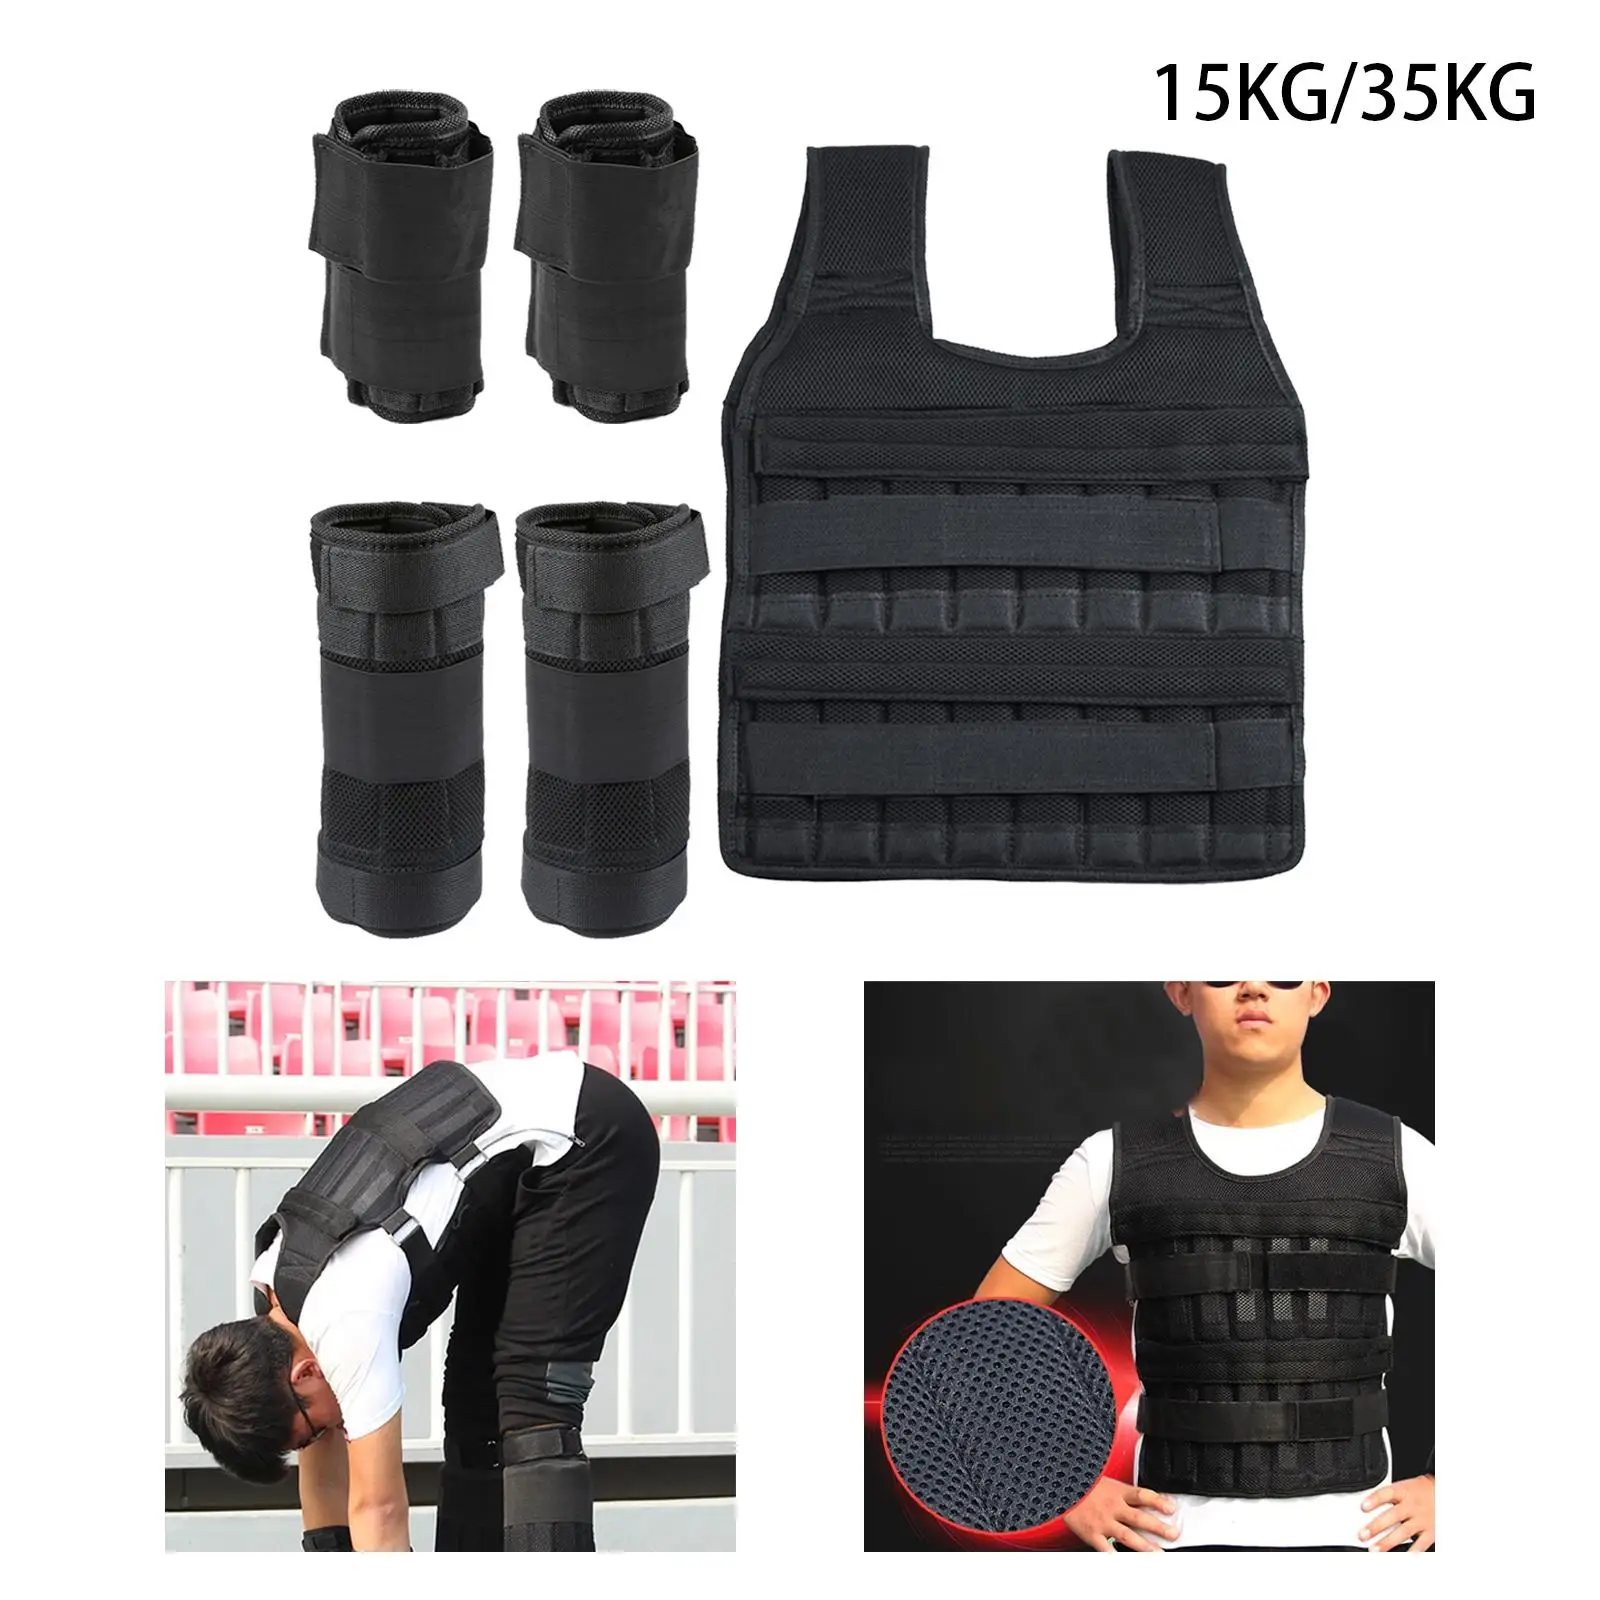 Weight Vest Weighted Bracelet Leg Weight Strength Training Accs Loading Vest